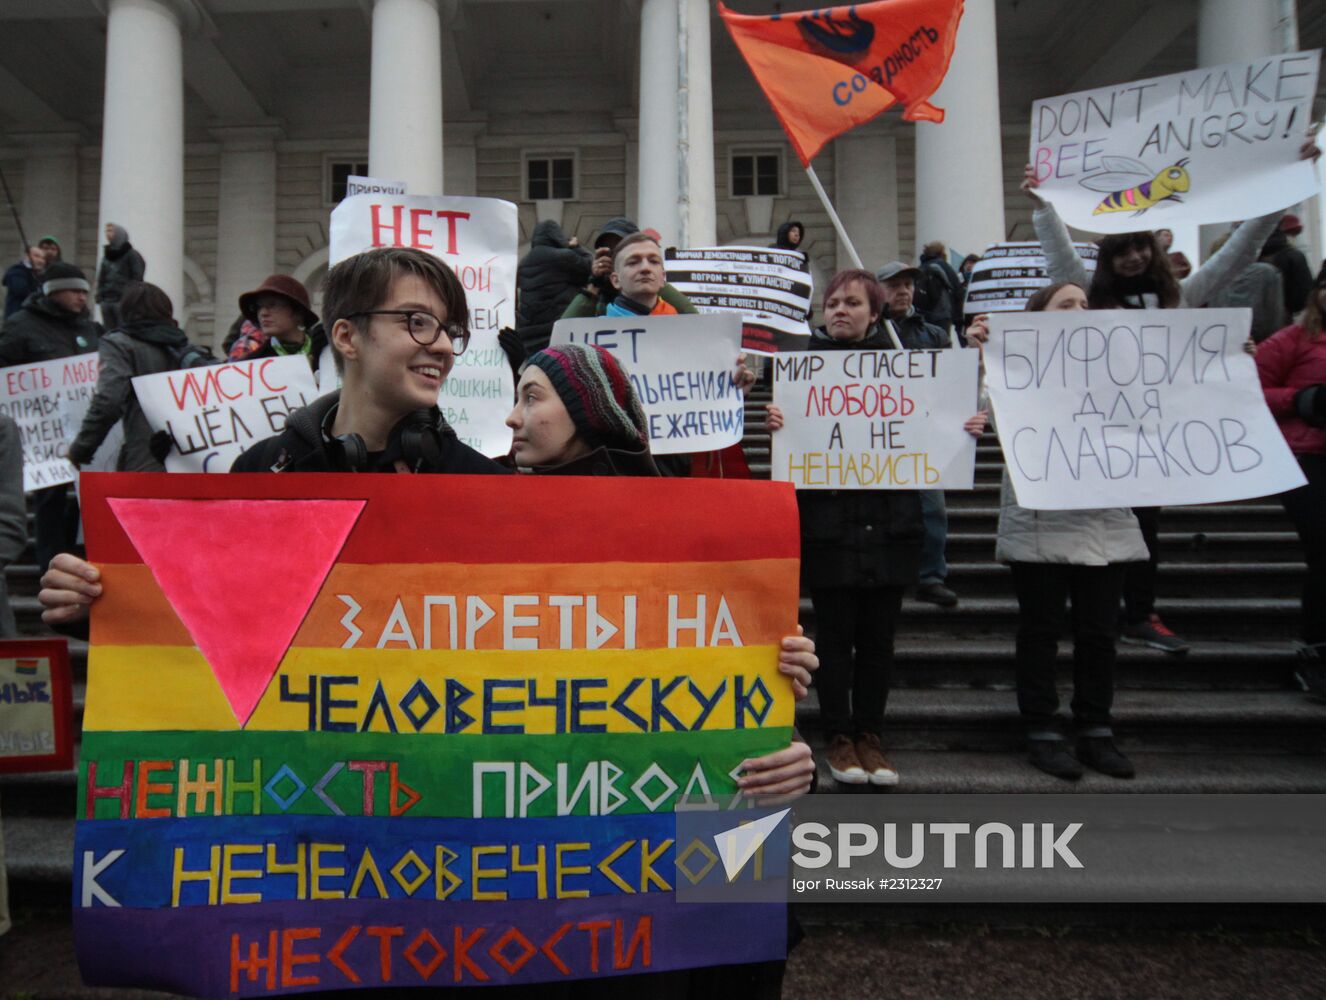 "March Against Hatred" in St. Petersburg